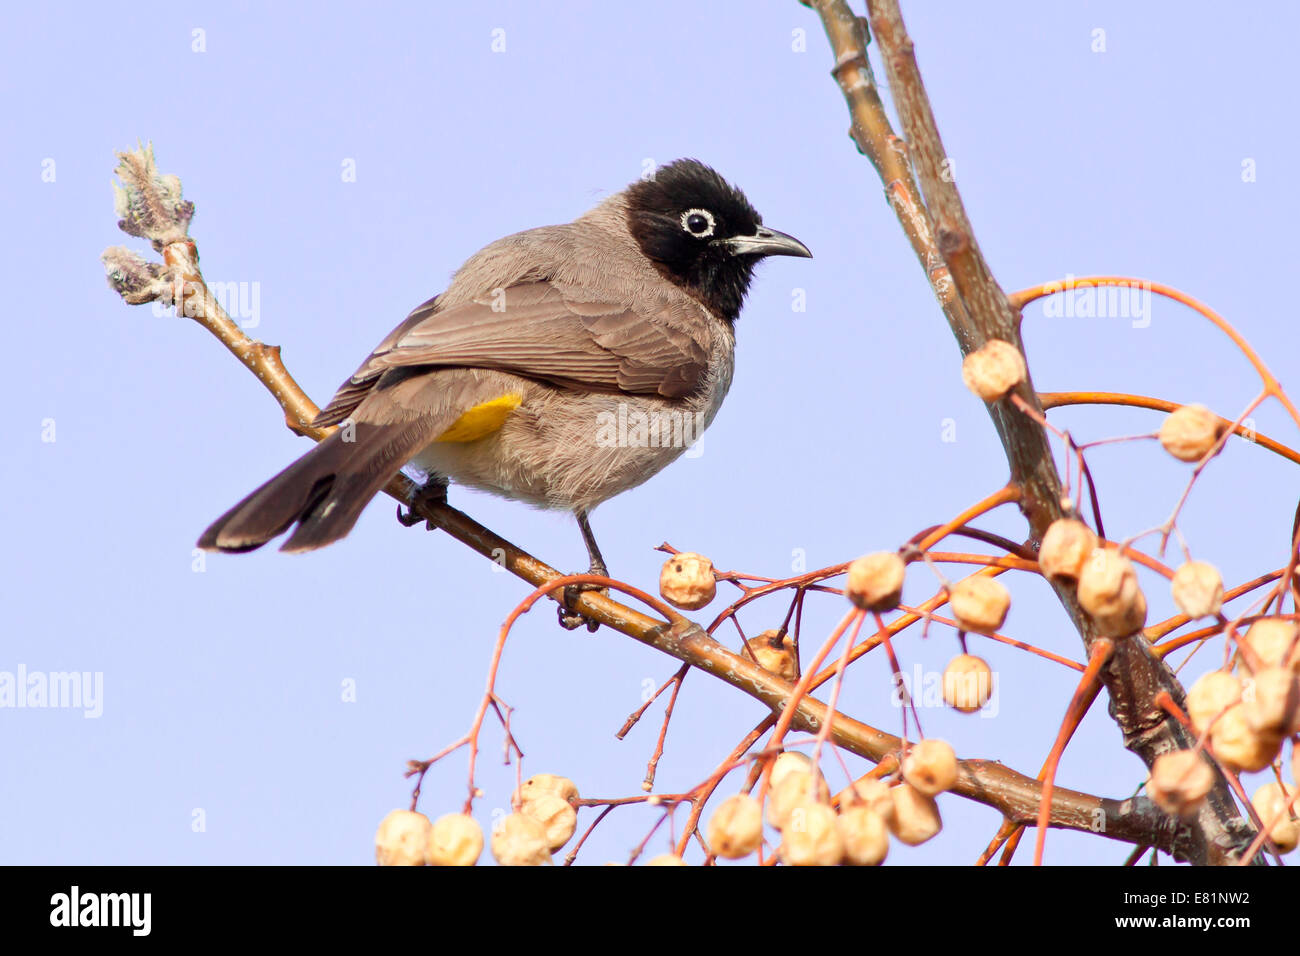 White-spectacled Bulbul or Yellow-vented Bulbul (Pycnonotus xanthopygos) on a branch, Antalya, Turkey Stock Photo